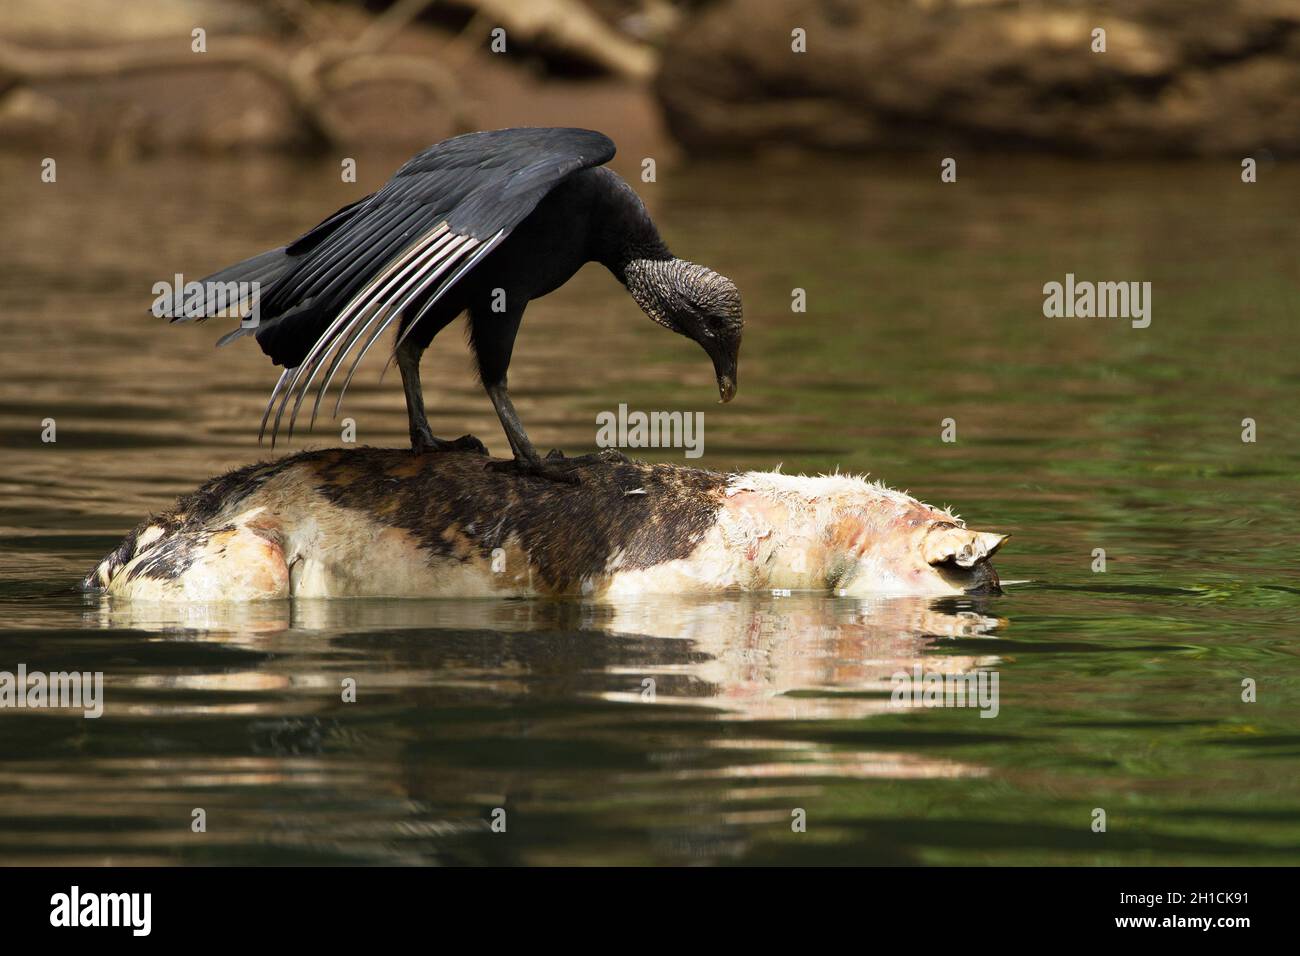 A black vulture (Coragyps atratus) scavenging on a dead pig, floating down the Sarapiqui river in Costa Rica Stock Photo